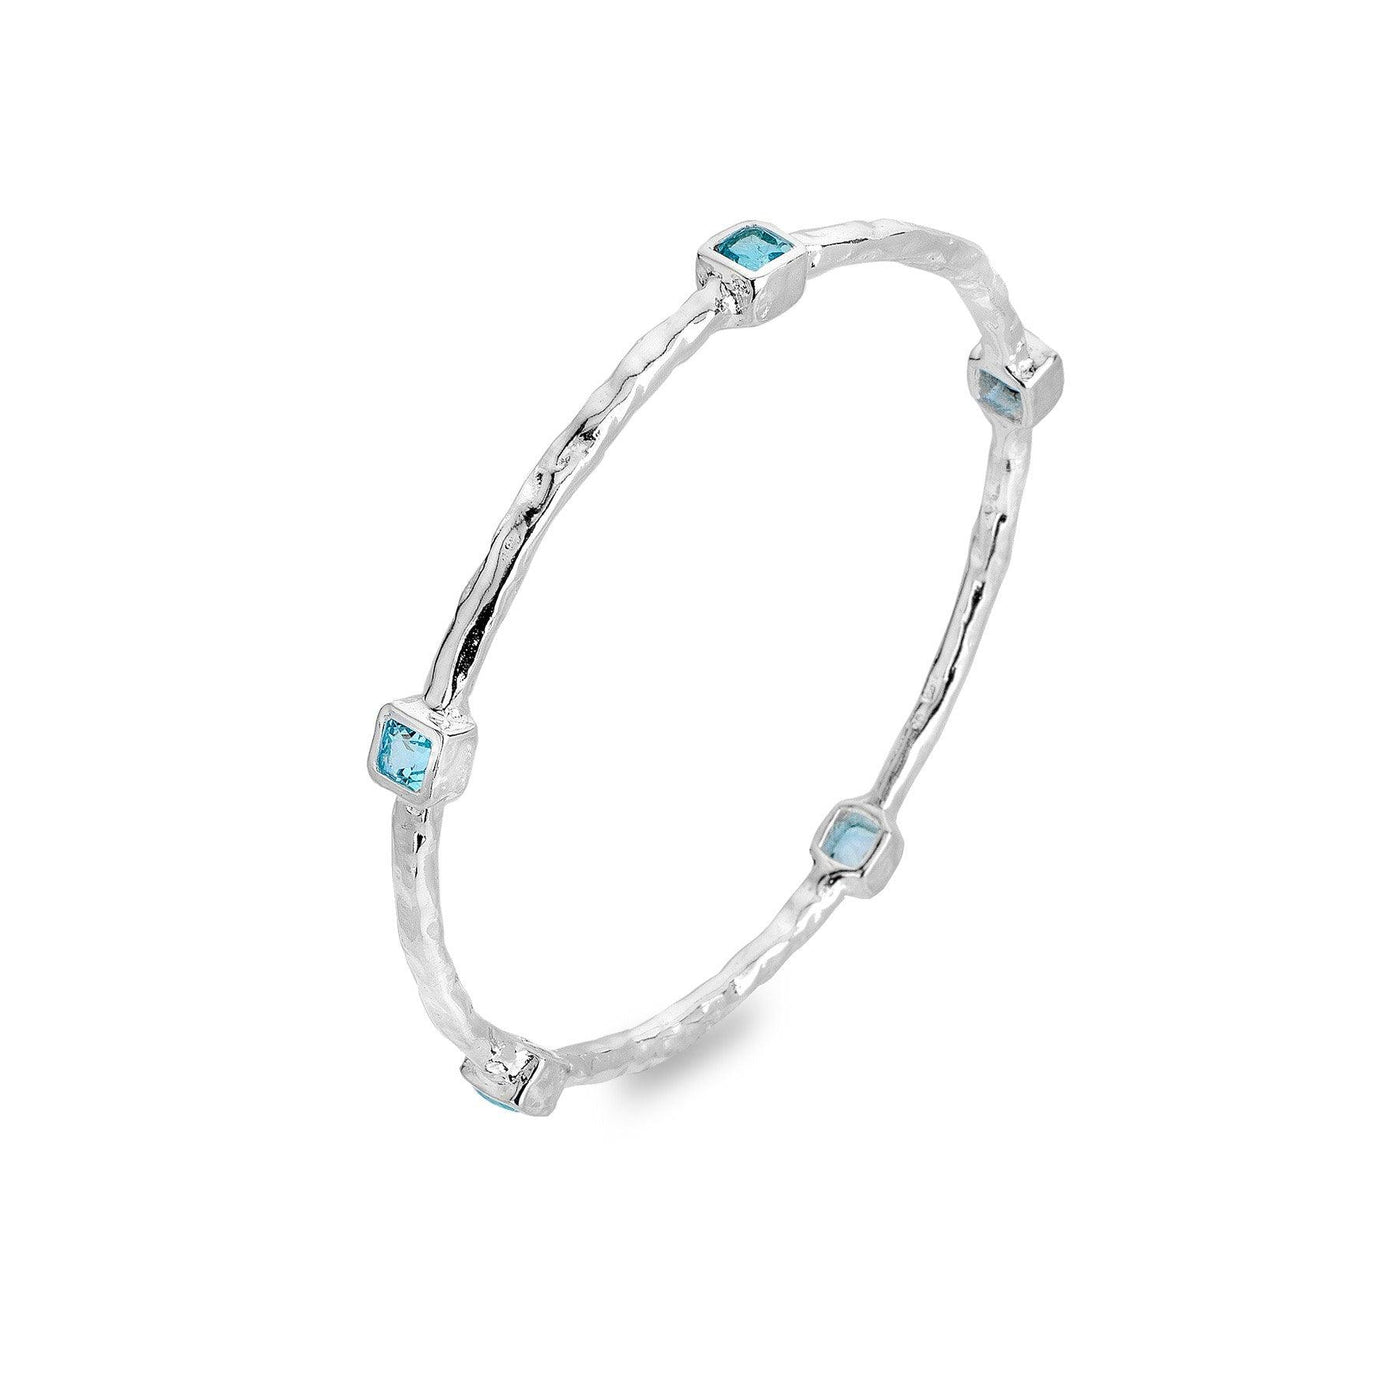 Sea Gems Sterling Silver and Blue Topaz Serenity Bangle